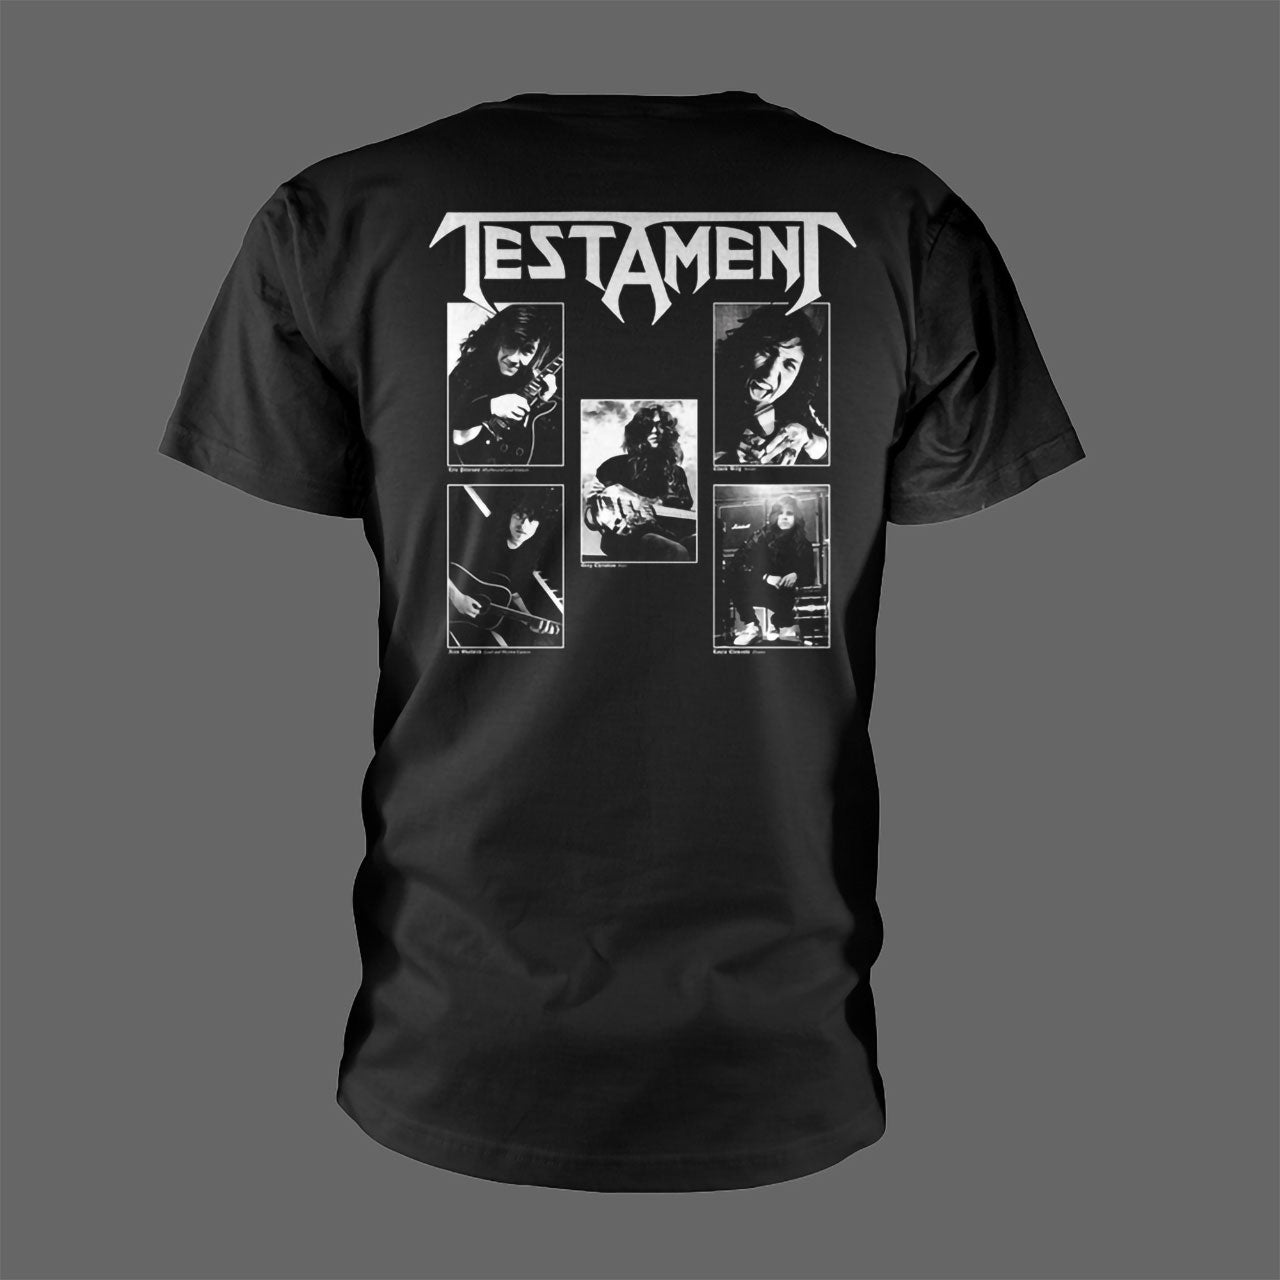 Testament - Practice What You Preach (T-Shirt)